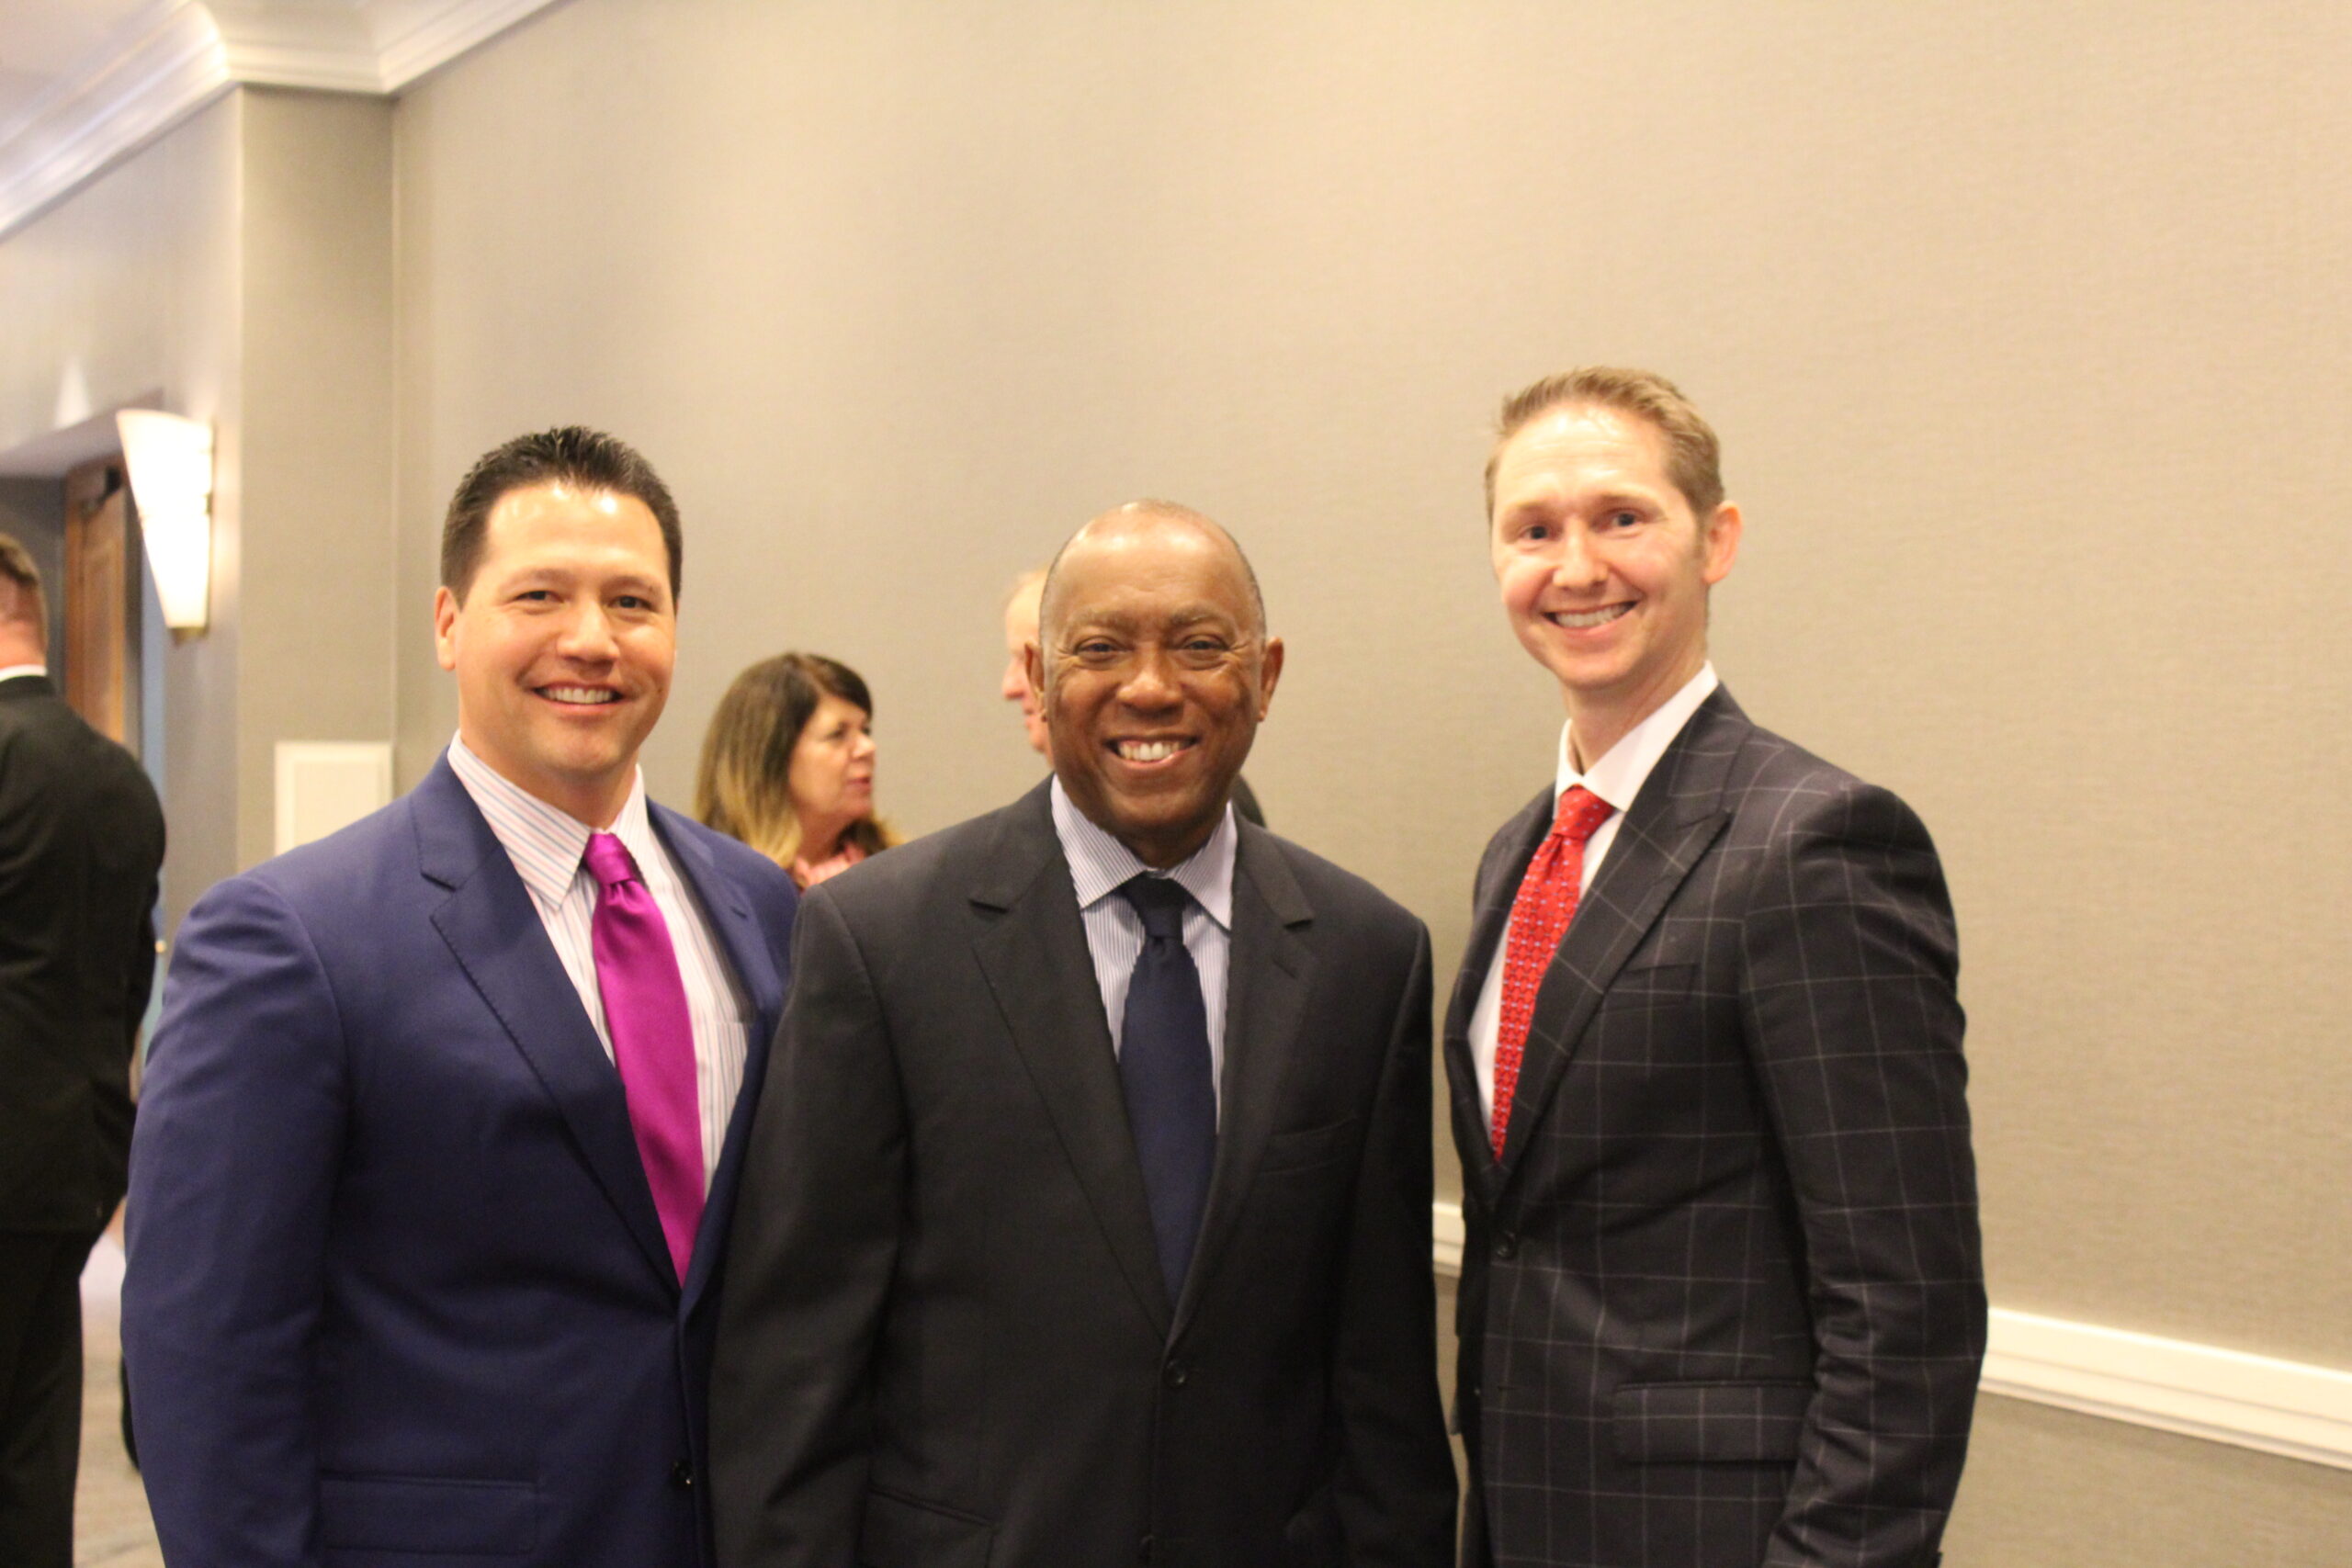 WHA hosts City of Houston Mayor at Annual City Issues Forum